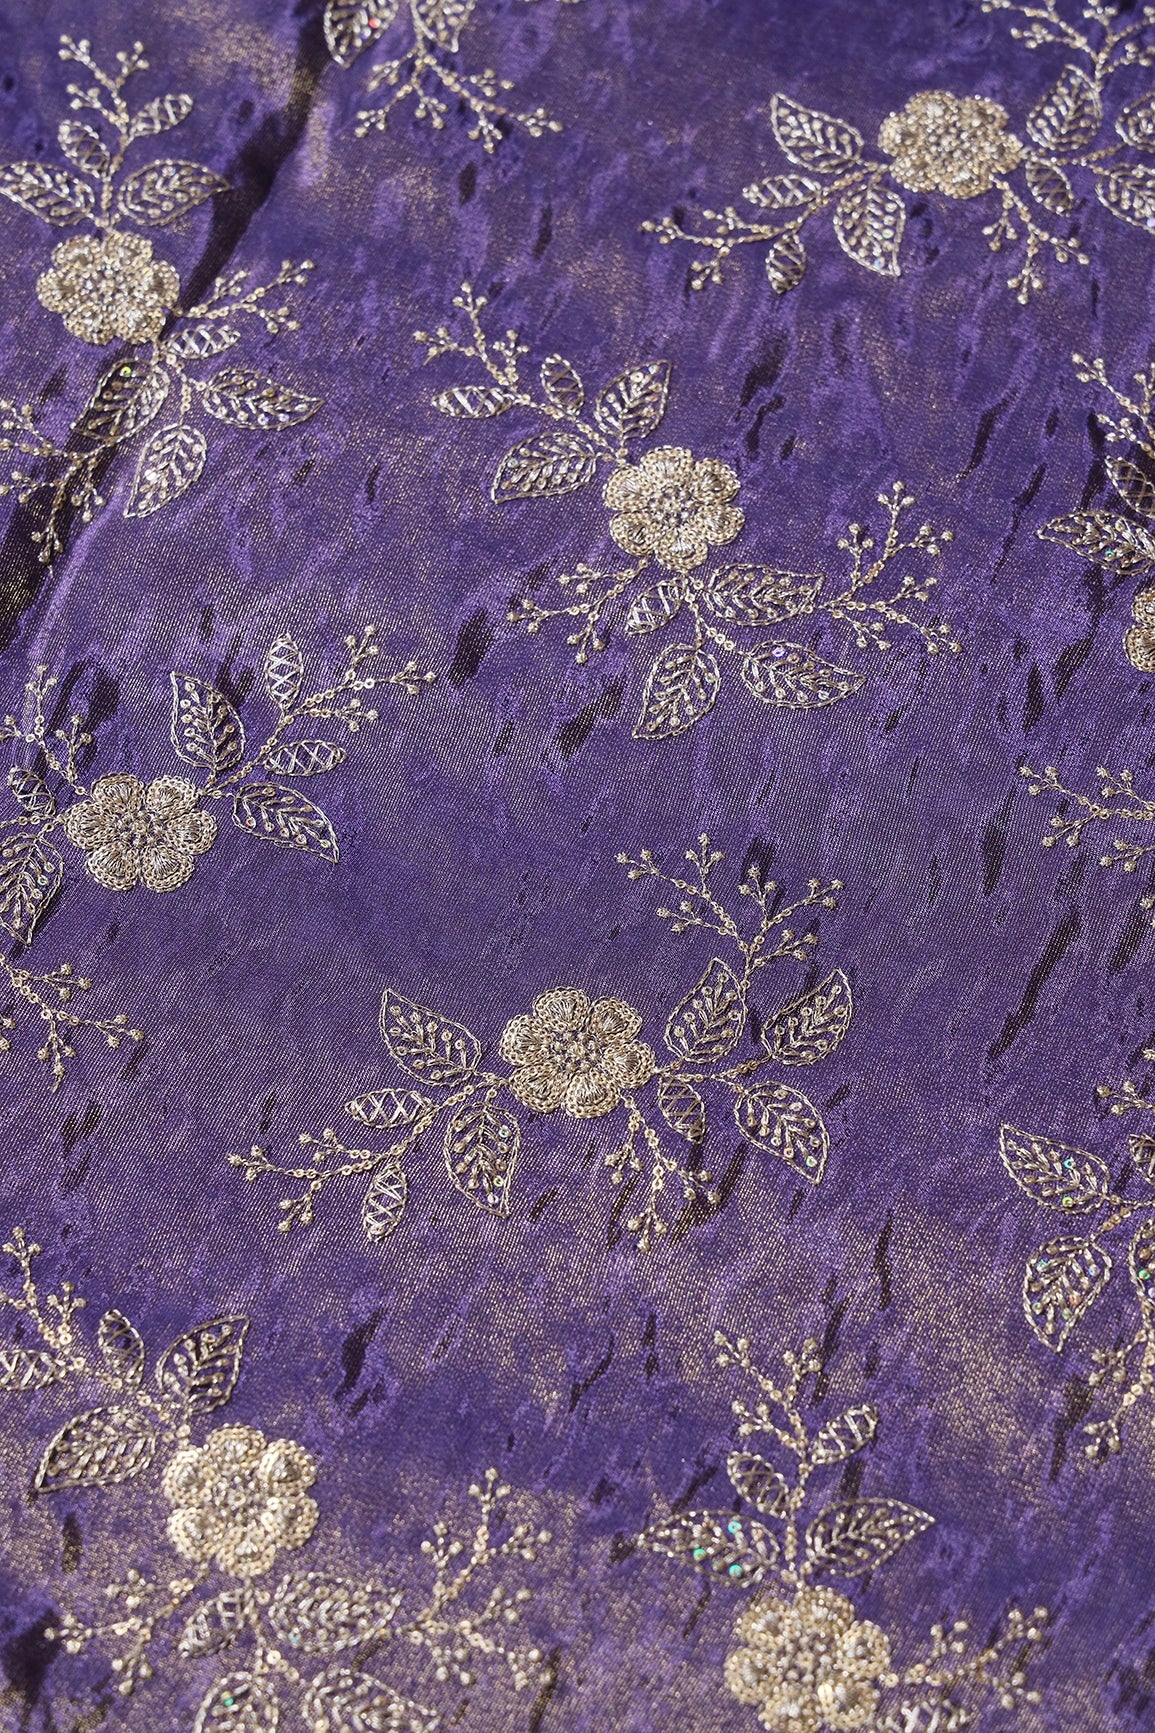 Gold Sequins And Zari Floral Embroidery Work On Purple Pure Viscose Zari Tissue Fabric